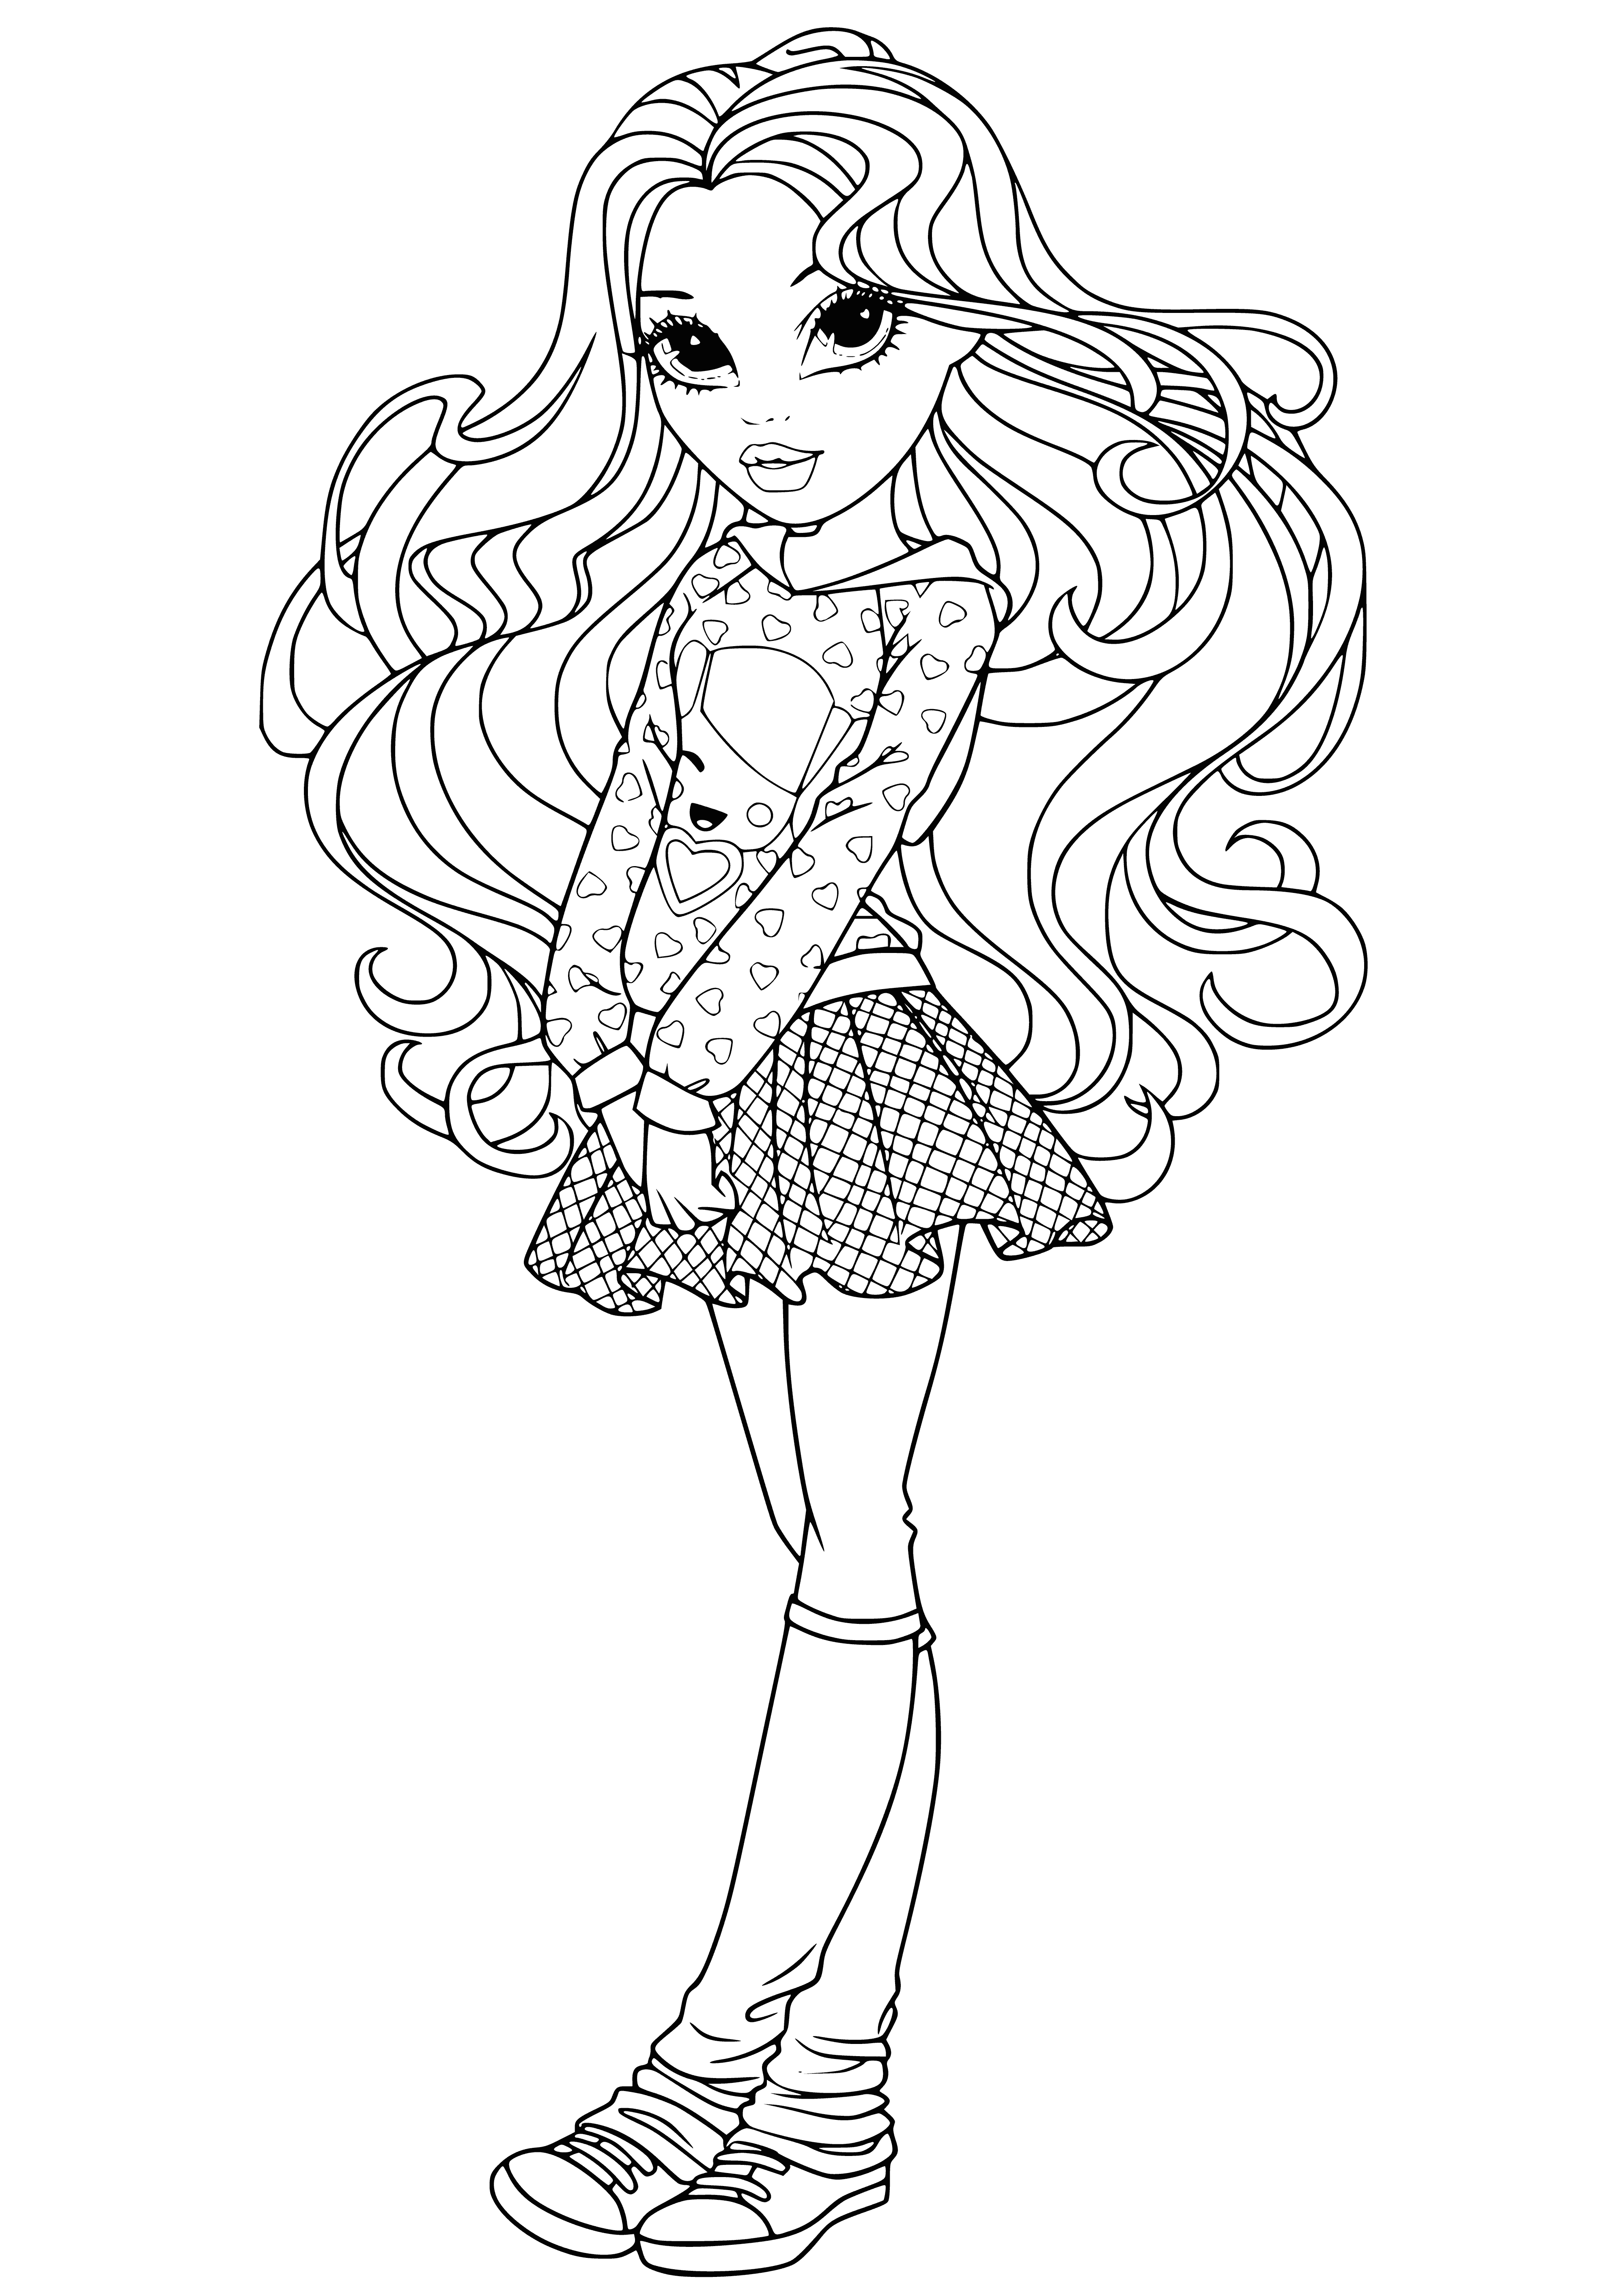 coloring page: Girl in coloring page wears pink dress w/ white scarf, brown curly hair & holds stack of books, sporting a big smile.